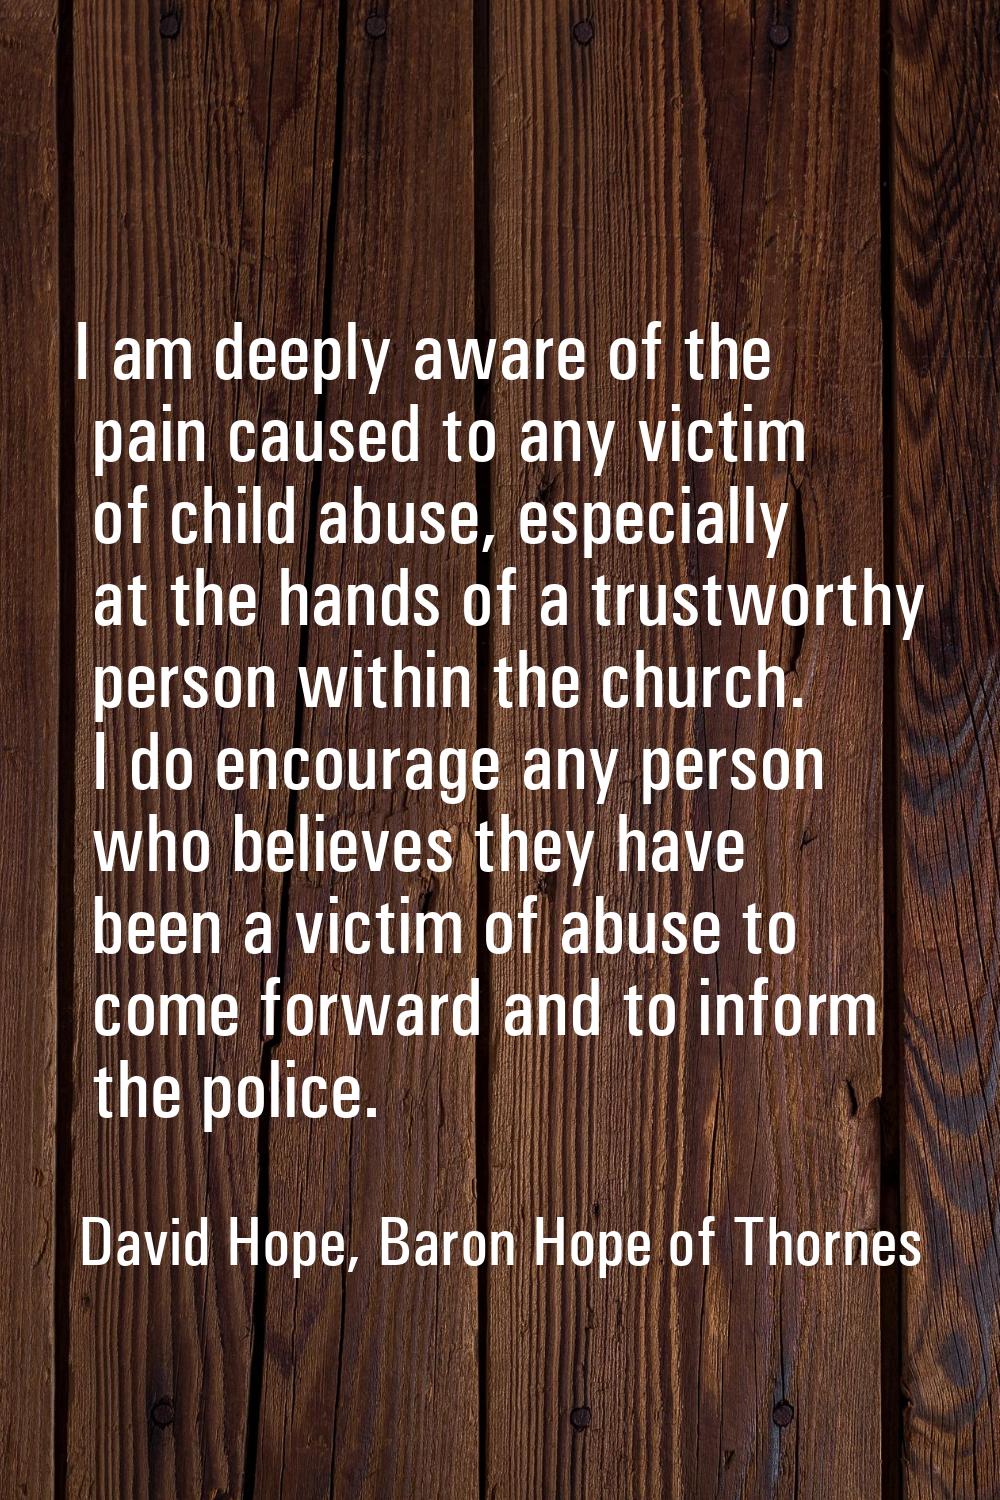 I am deeply aware of the pain caused to any victim of child abuse, especially at the hands of a tru